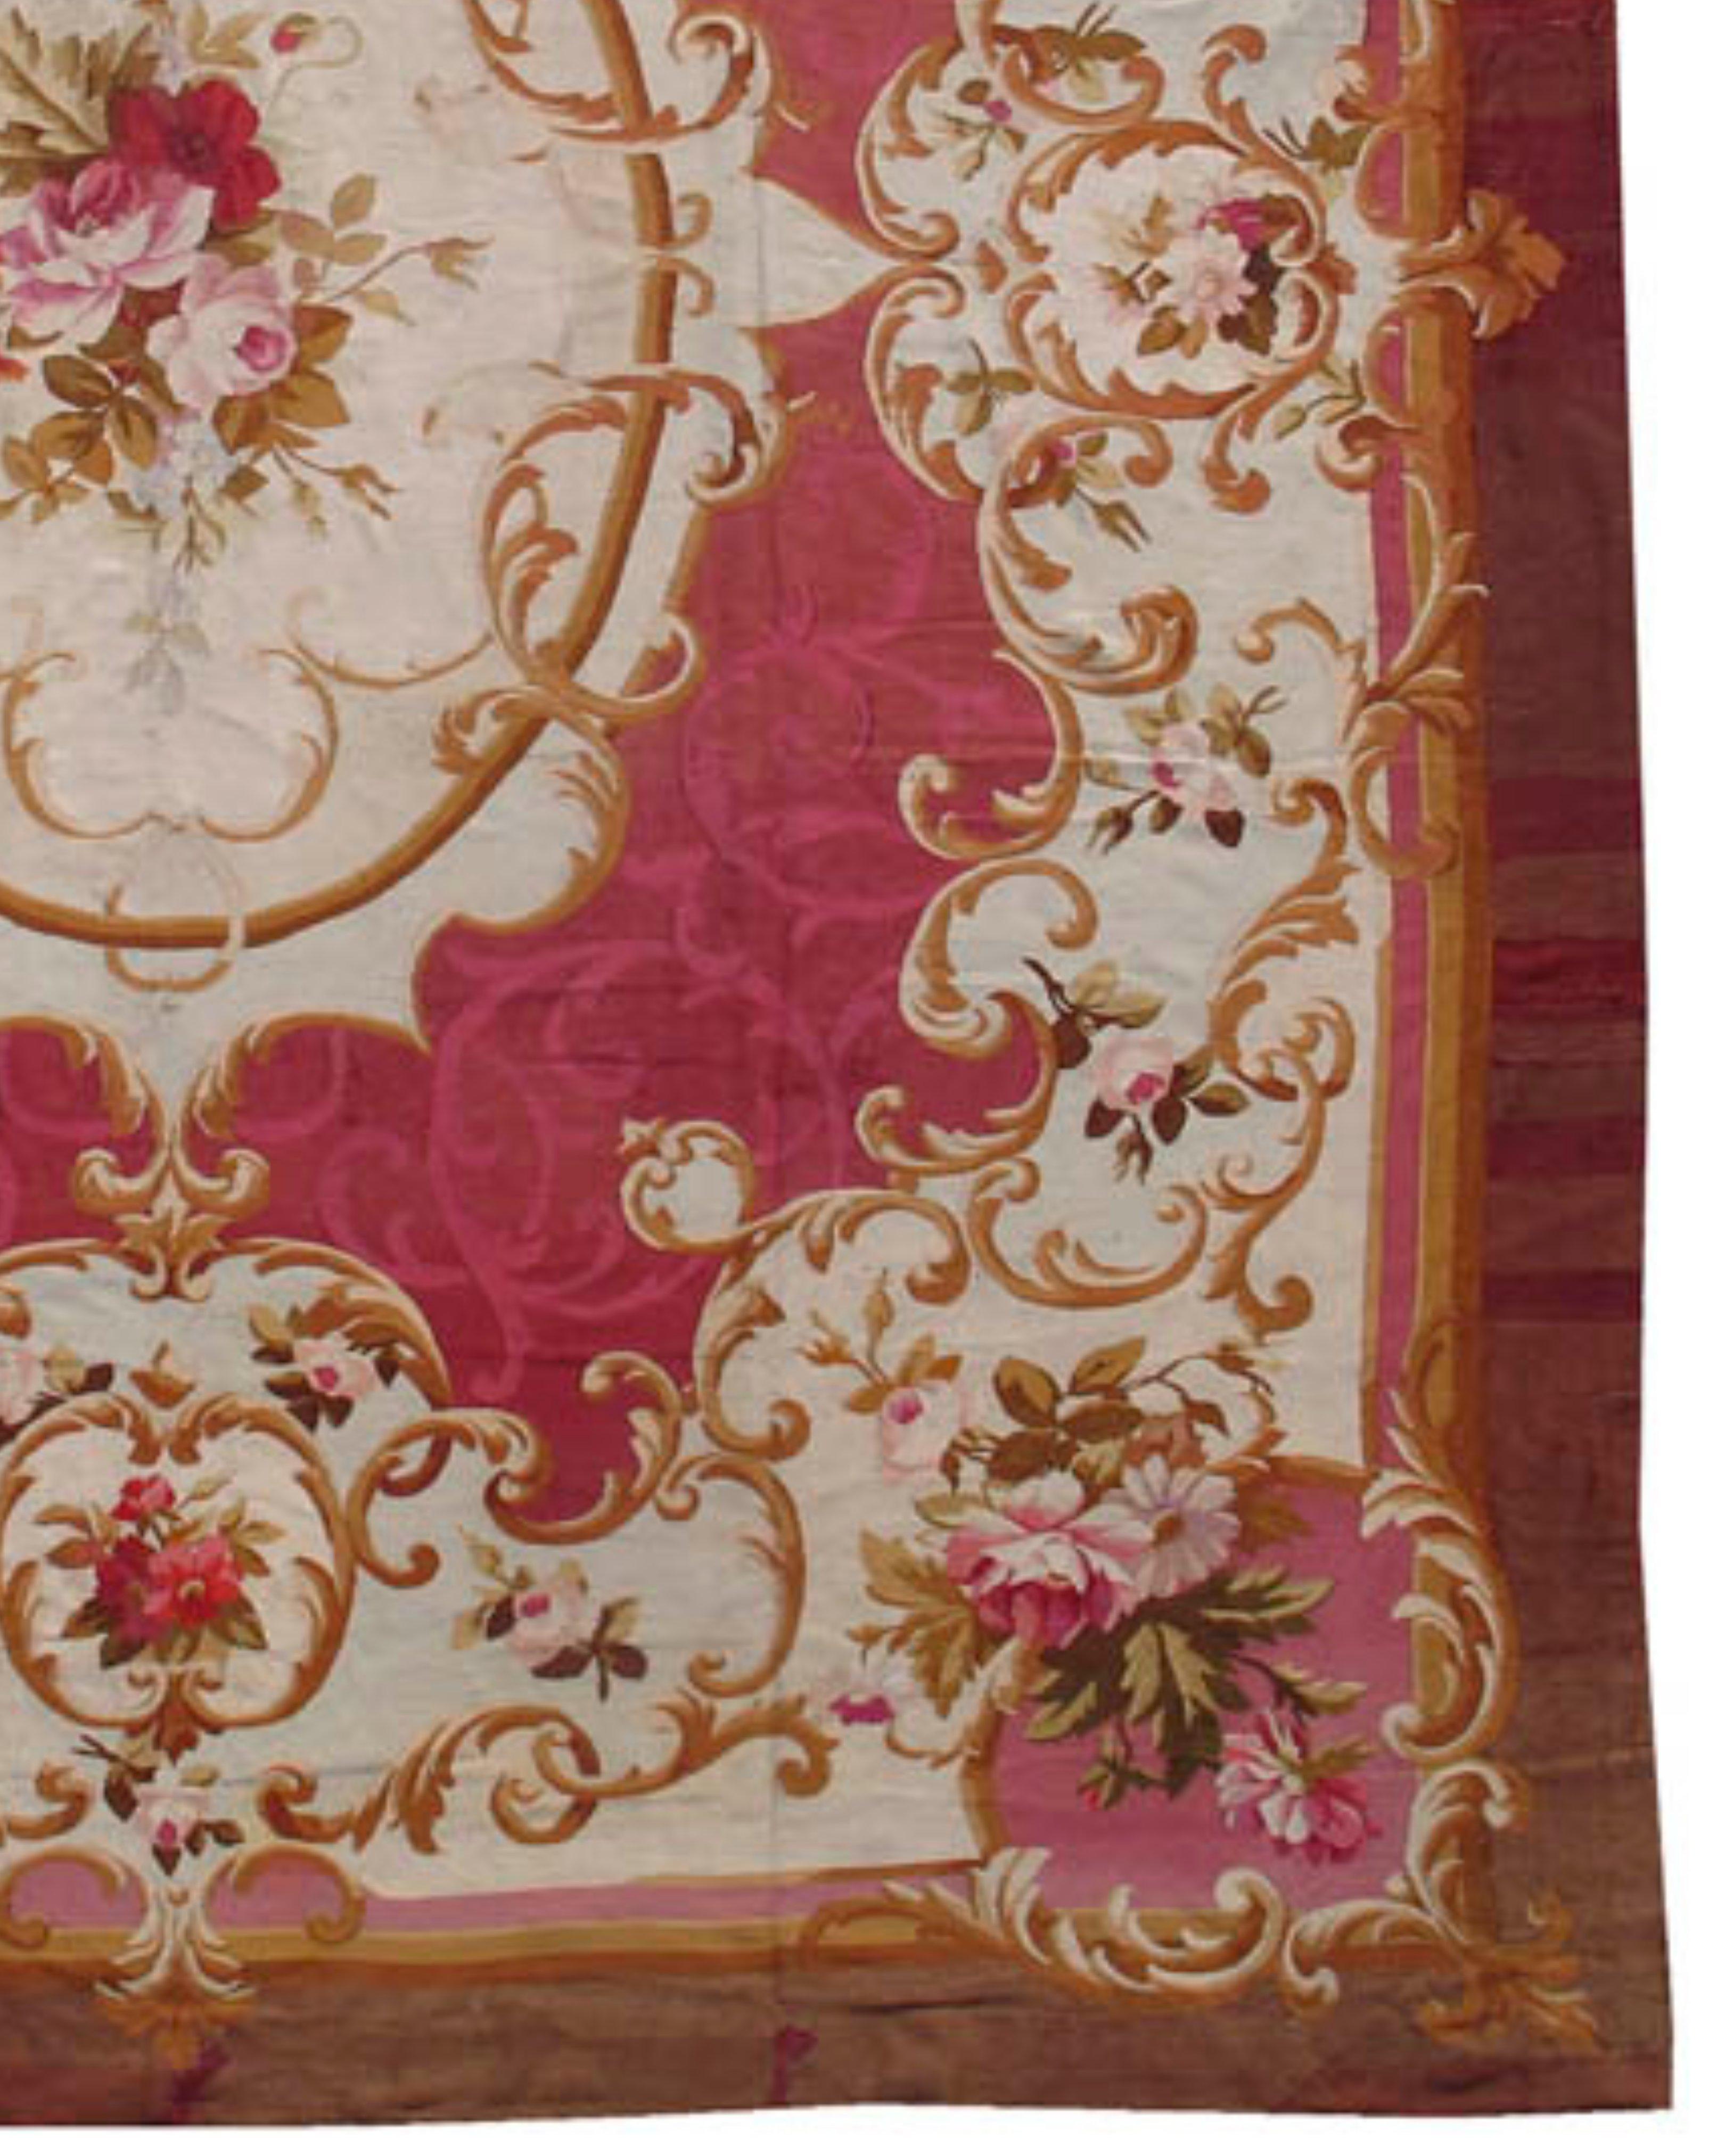 Aubusson Rug, Mid-19th Century

Additional Information:
Dimensions: 11'6